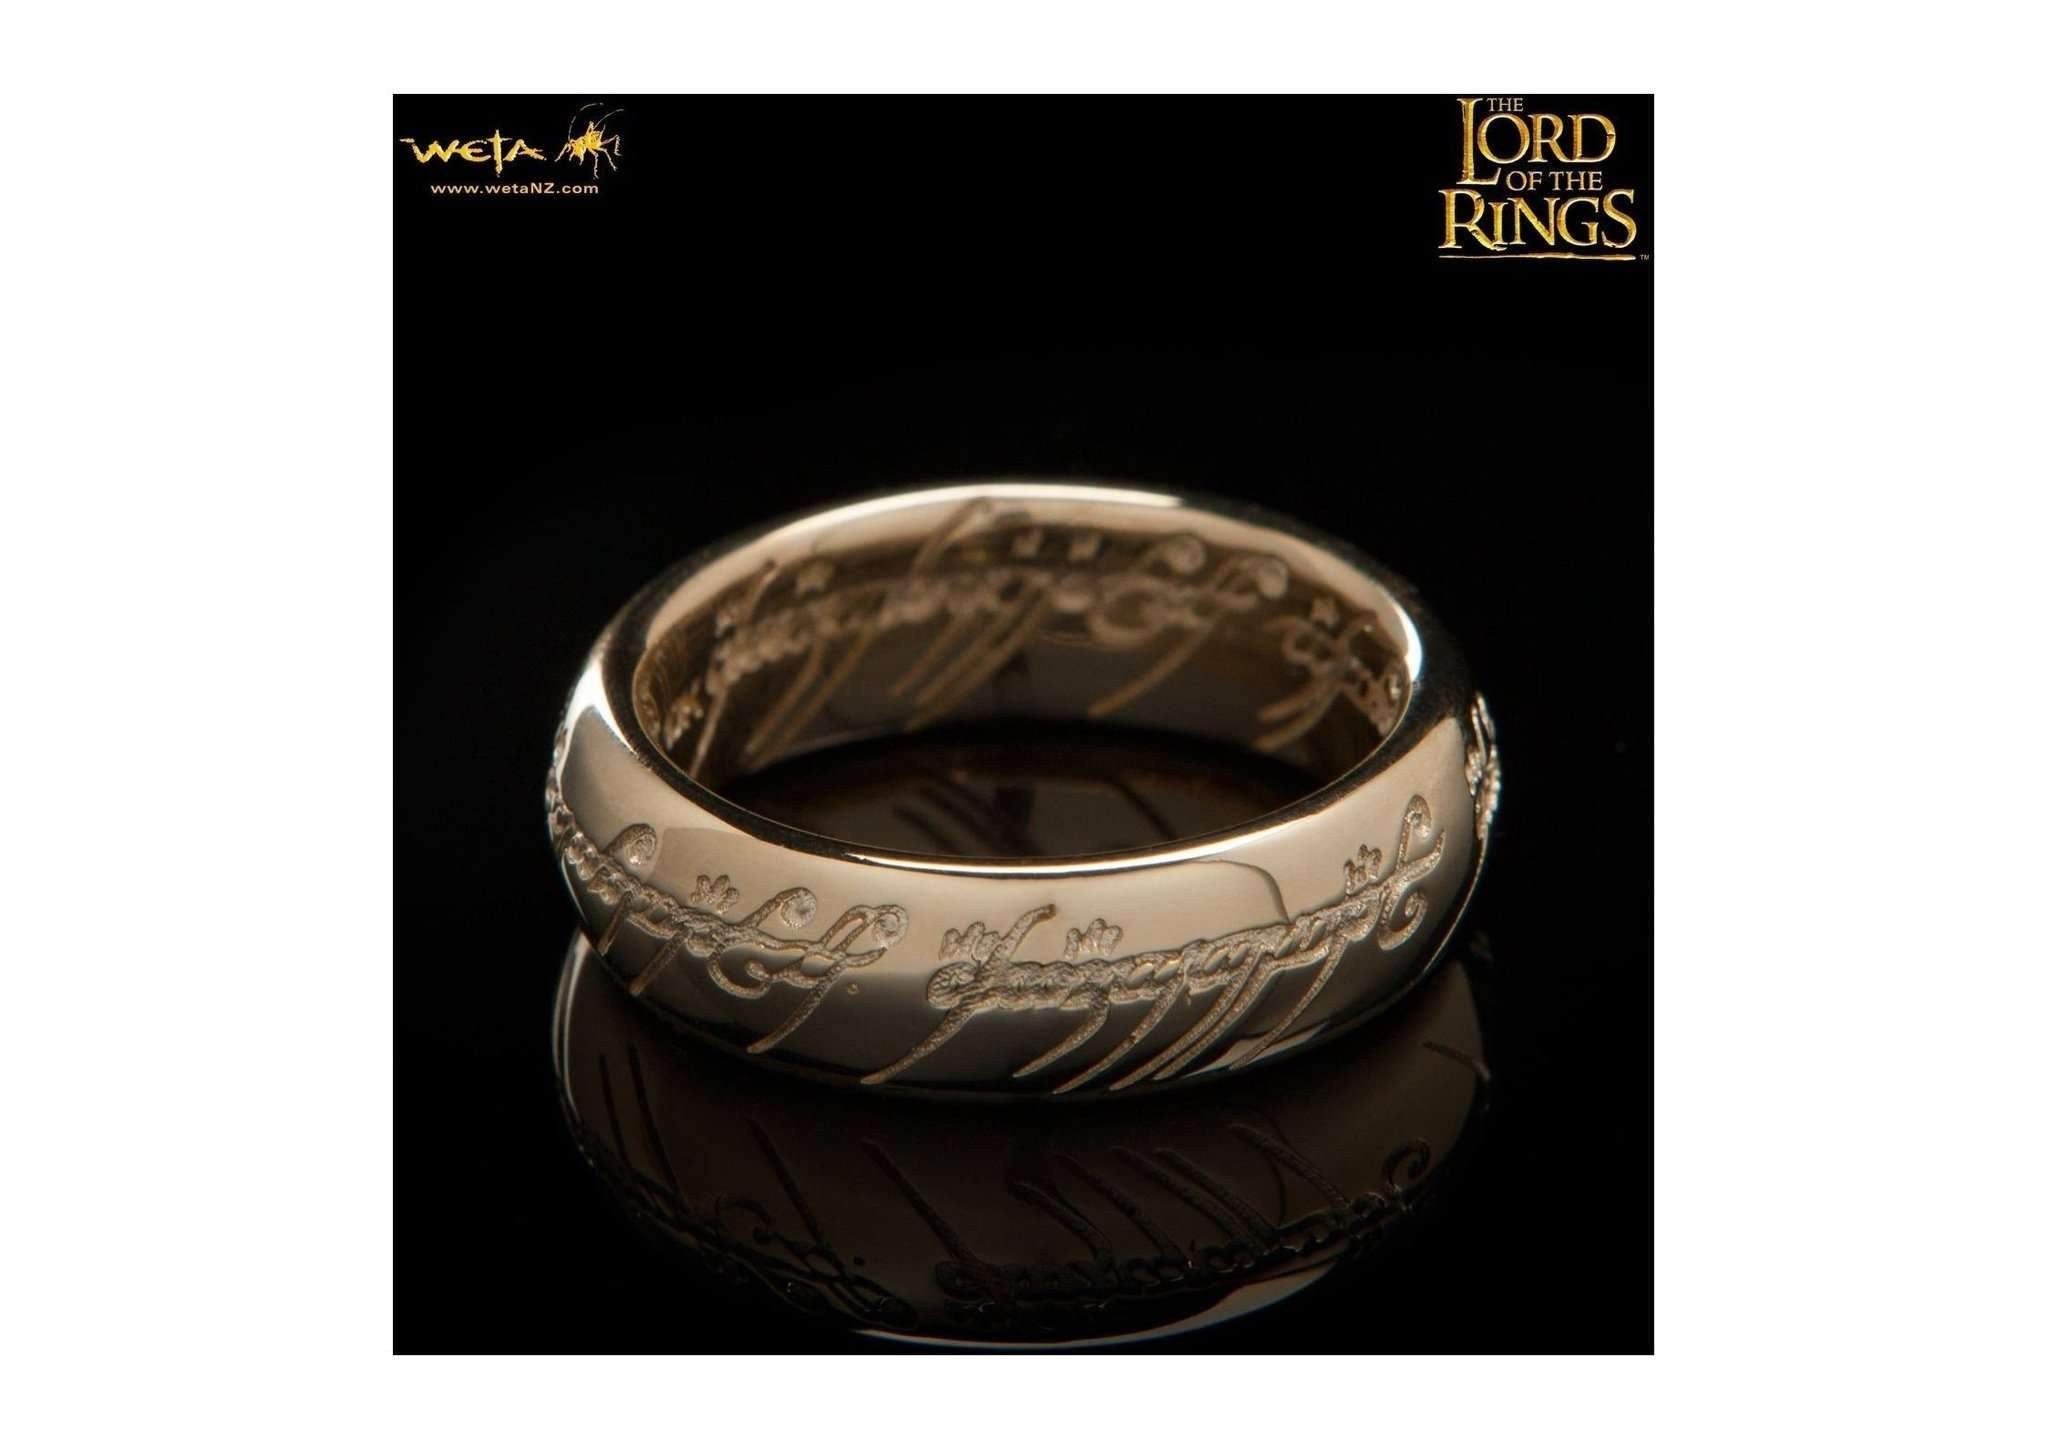 gollum-ring-the-one-ring-10k-solid-gold-with-elvish-runes-jens